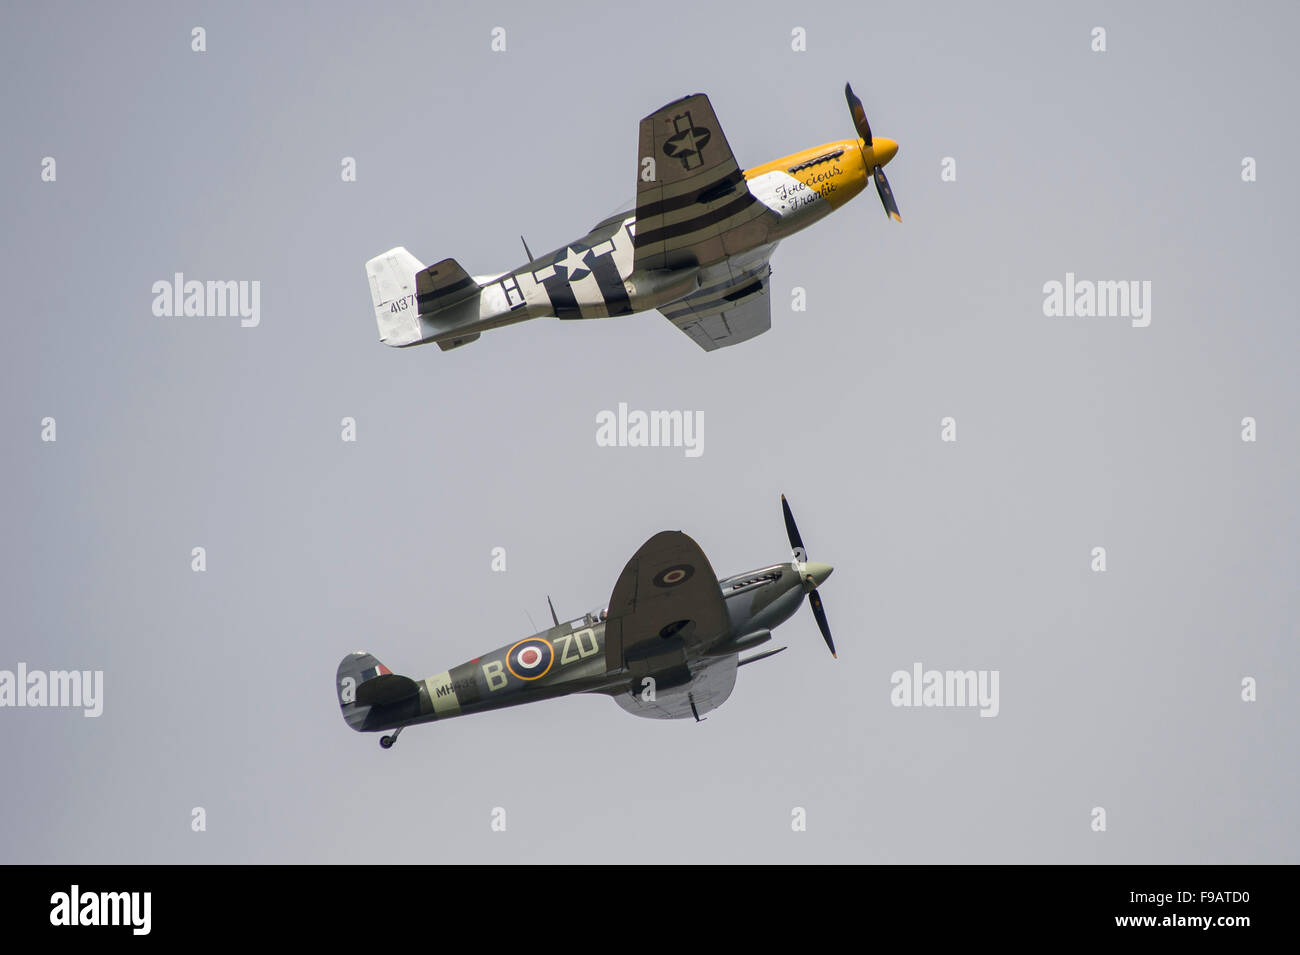 A spitfire and a mustang world war 2 planes in close formation flying at an air show Stock Photo